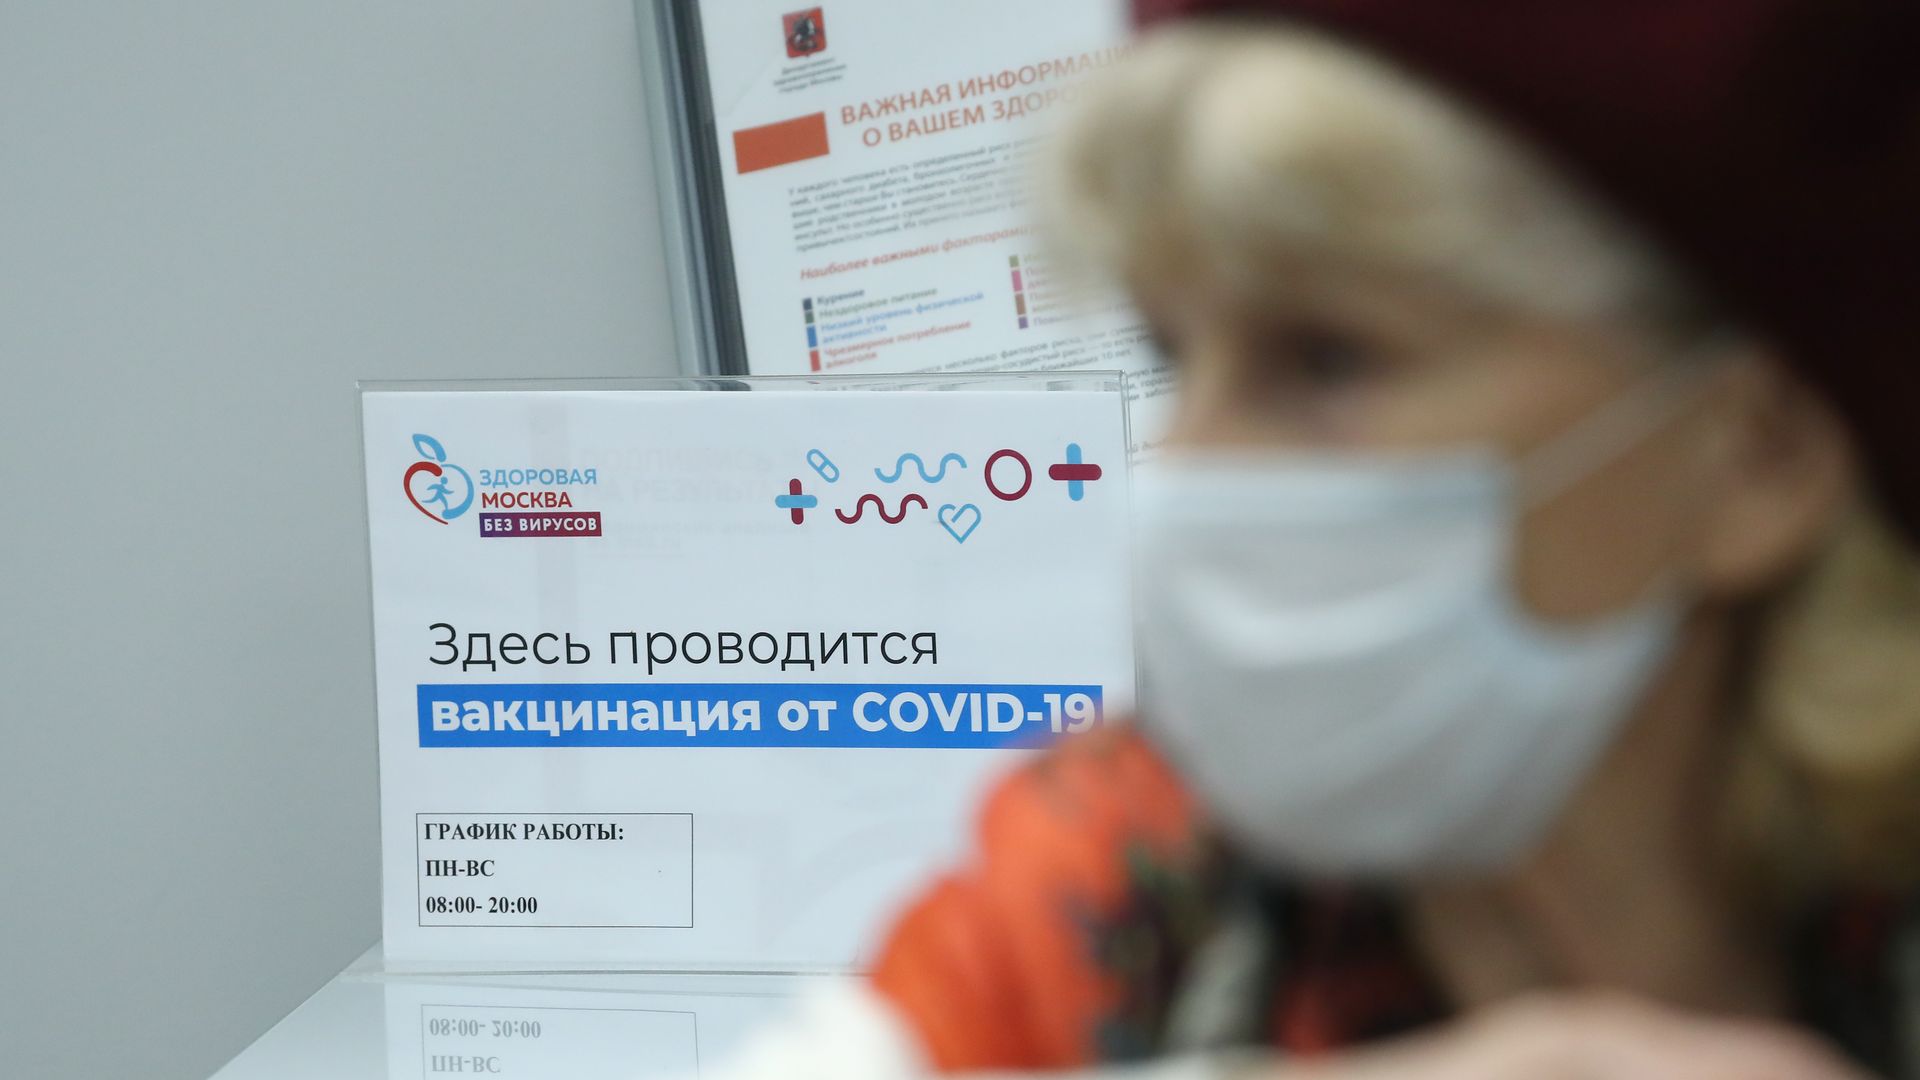 Woman receives a vaccine jab, with a sign behind her in Russian cyrillic 